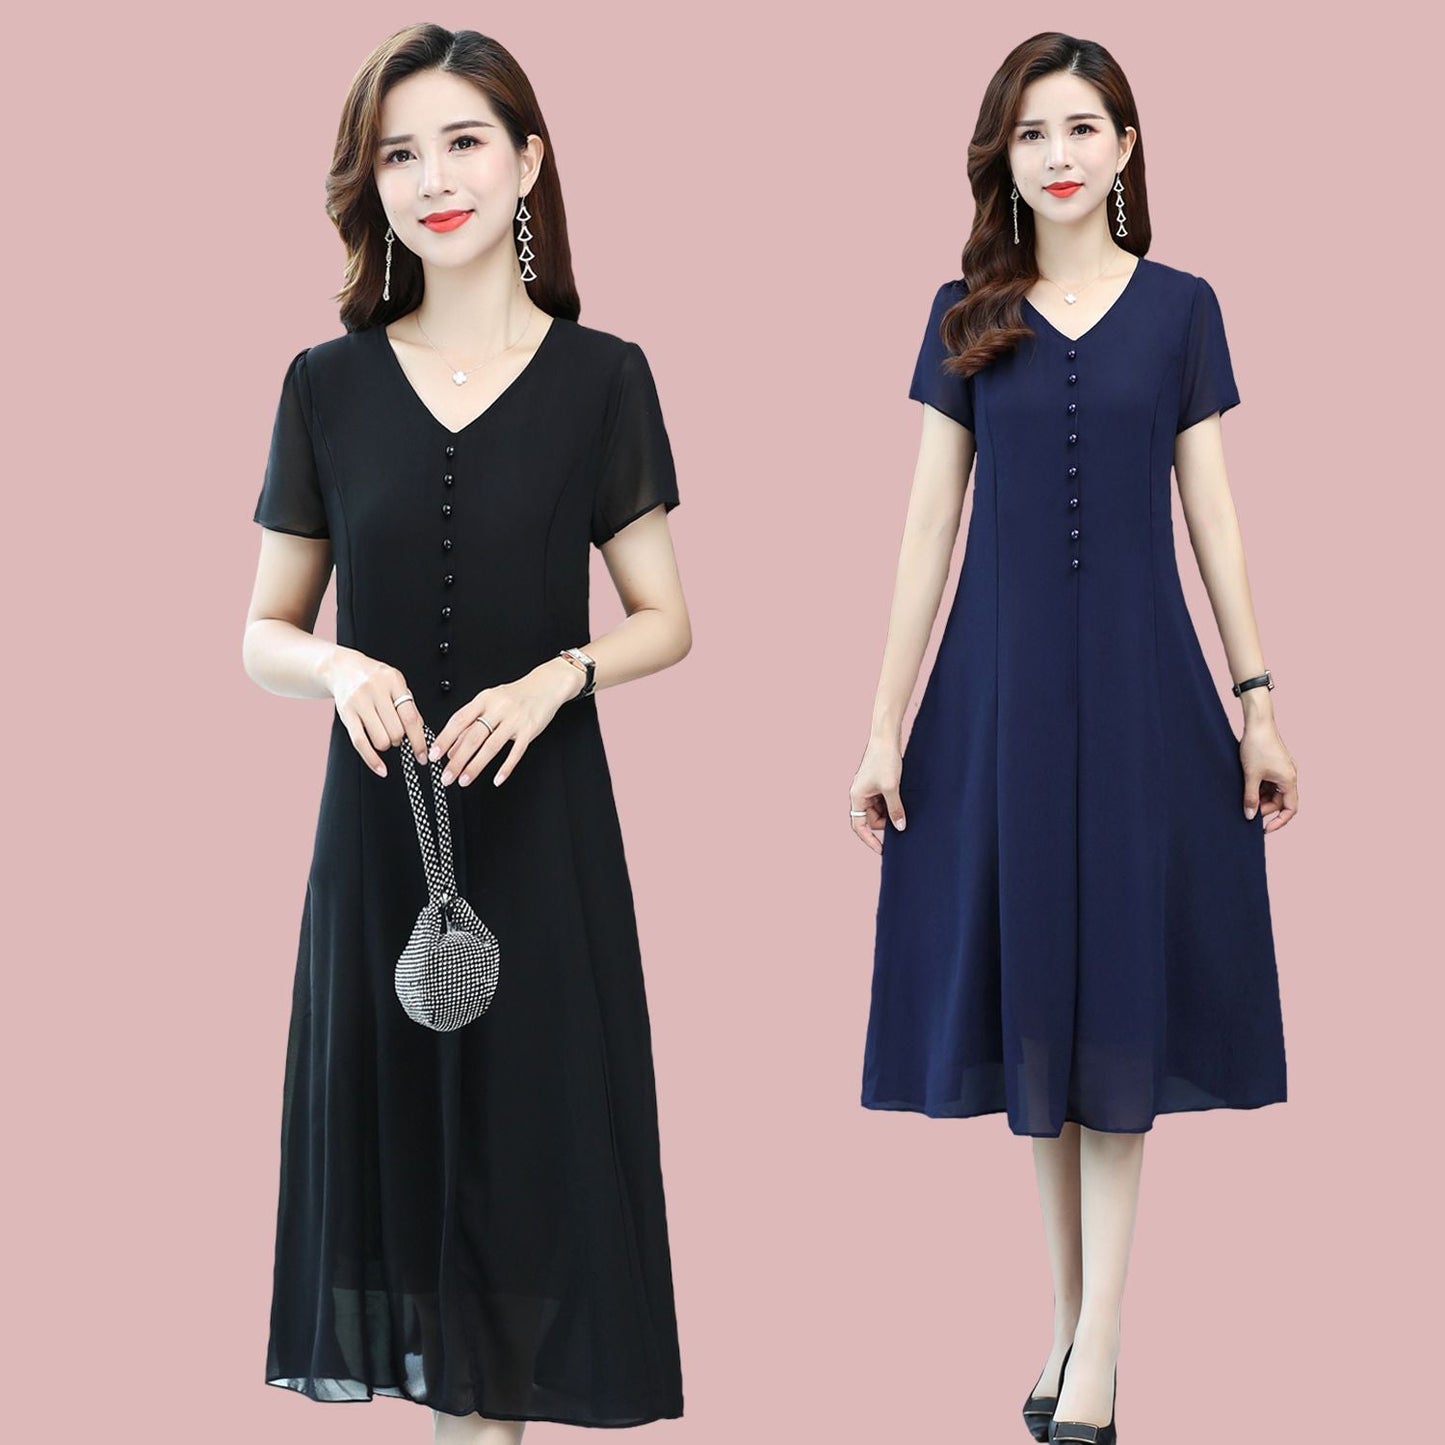 2022 New Summer Dress Mother's Chiffon Dress 40-50 Middle-Aged and Elderly Women Solid Color Overknee A- line Skirt